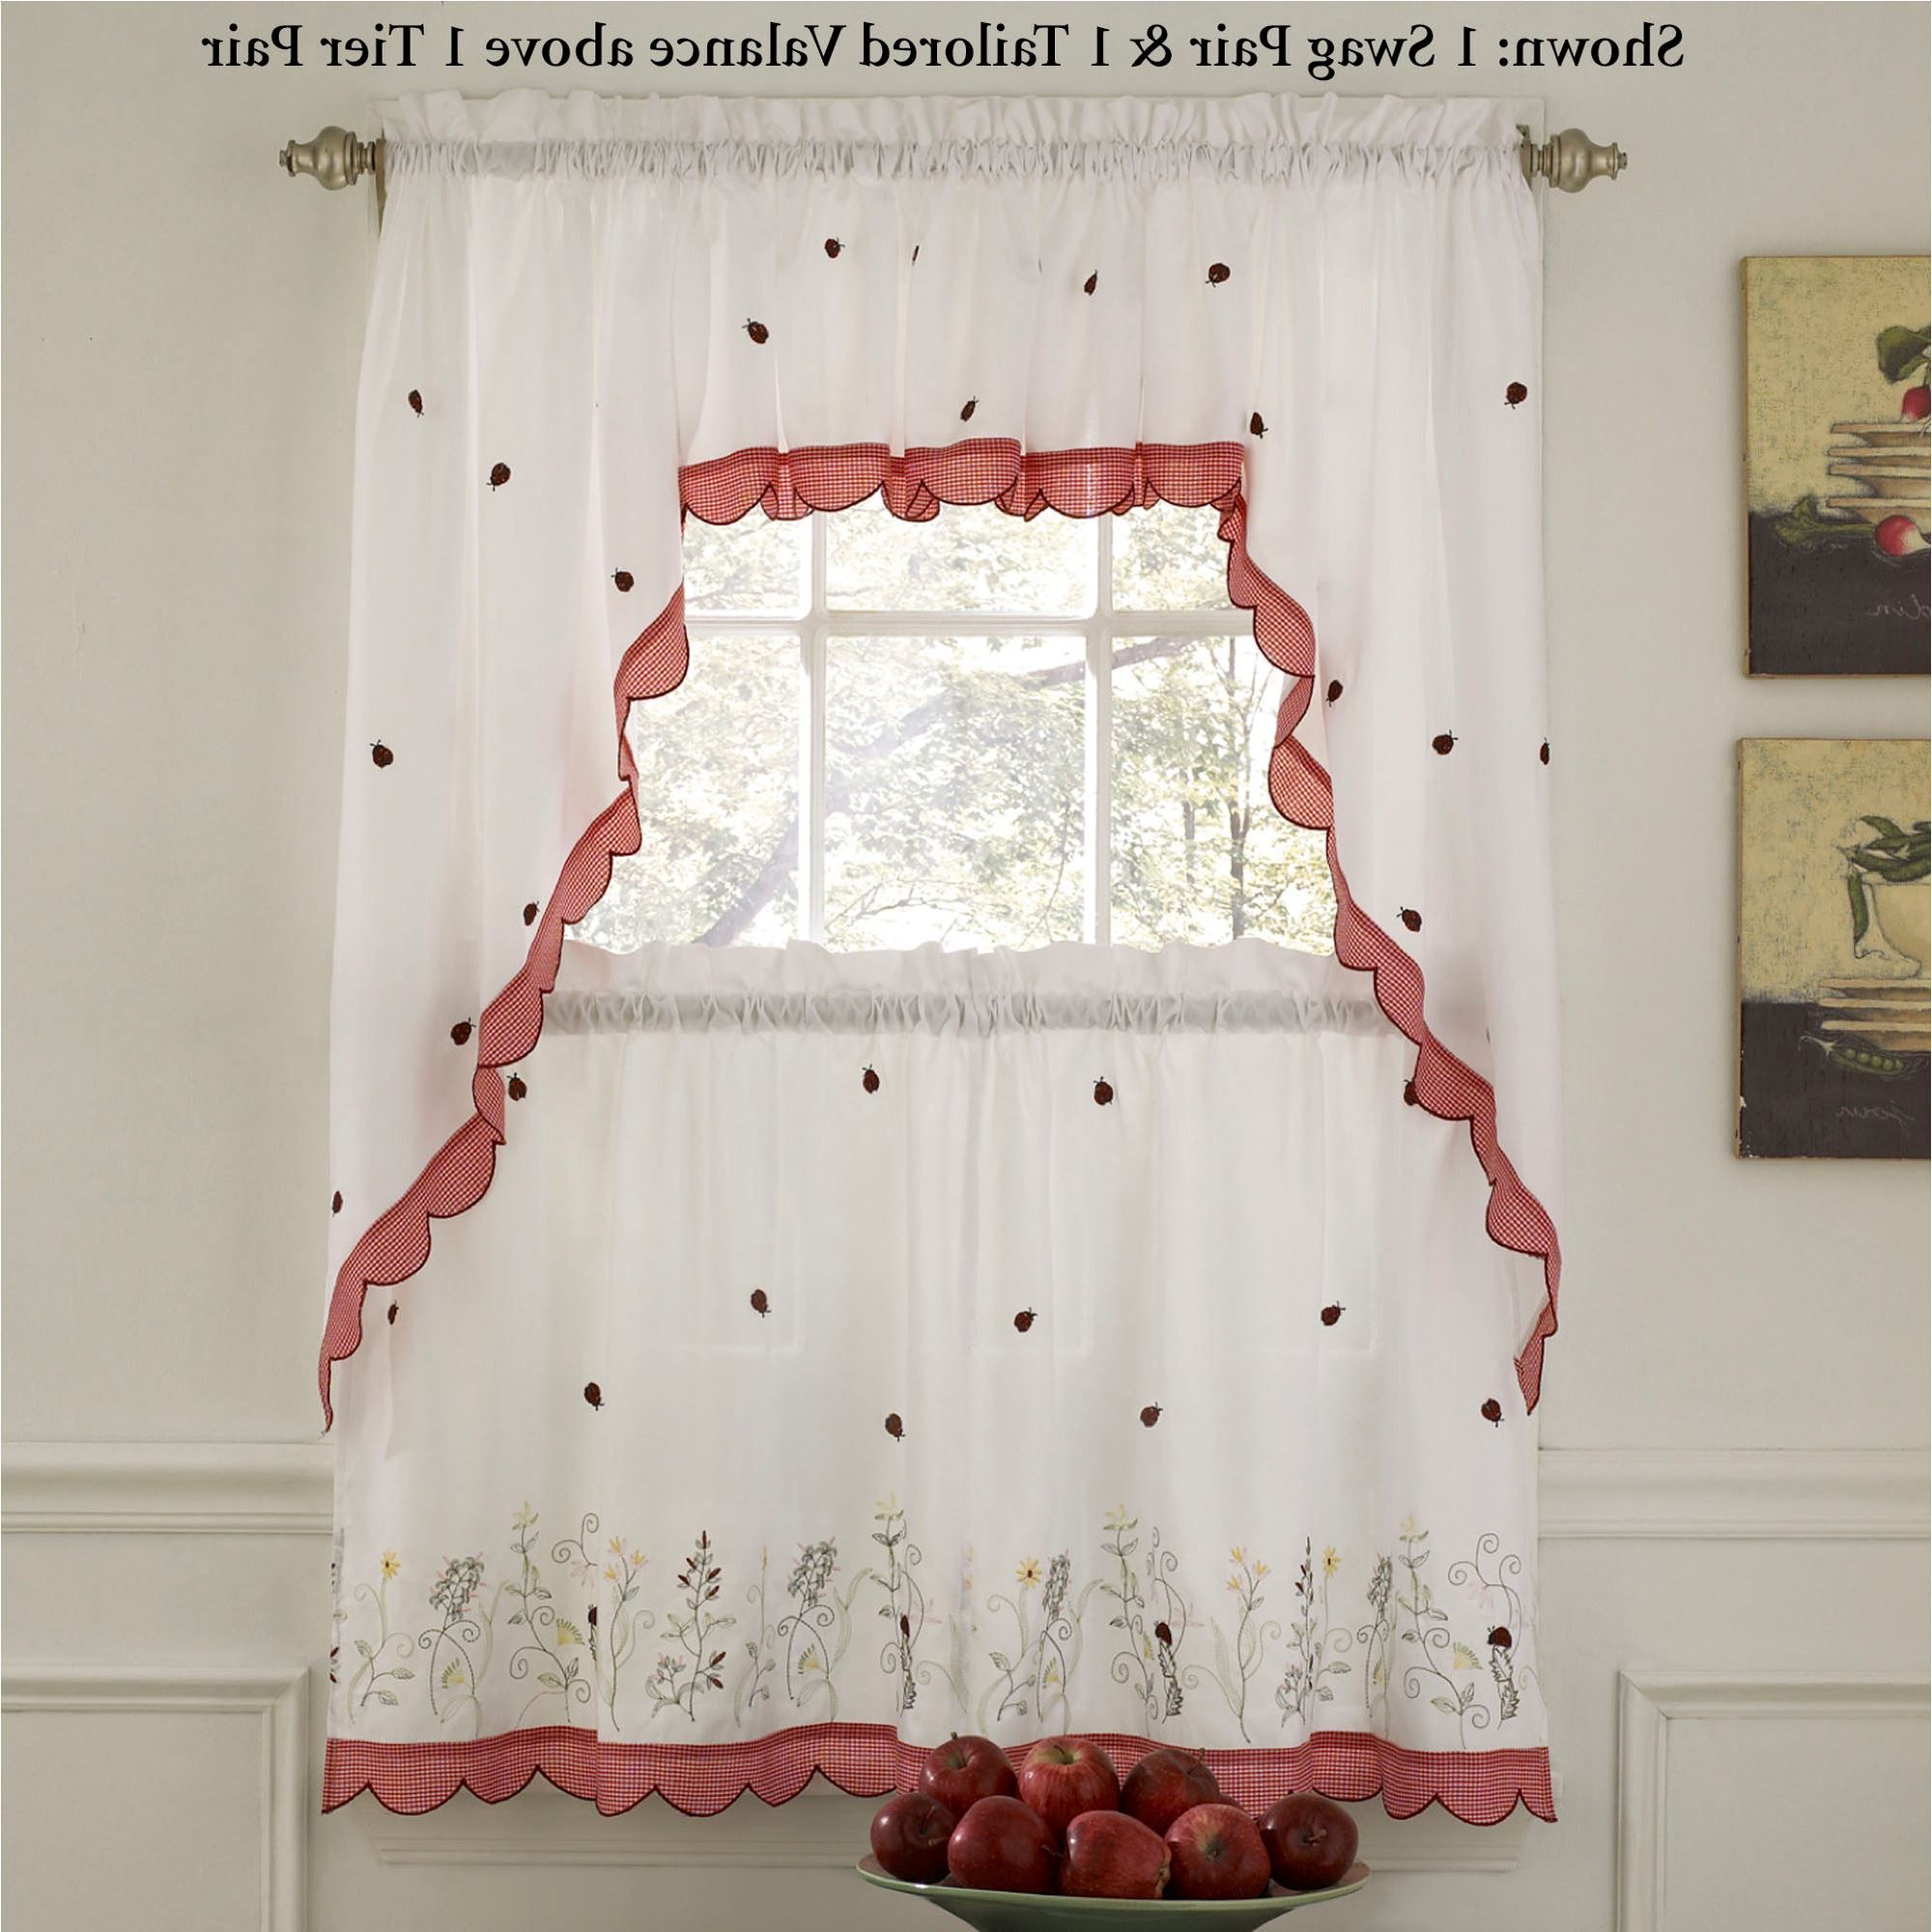 2020 Hudson Pintuck Window Curtain Valances With Kitchen Window Tier – Martinique (View 9 of 20)